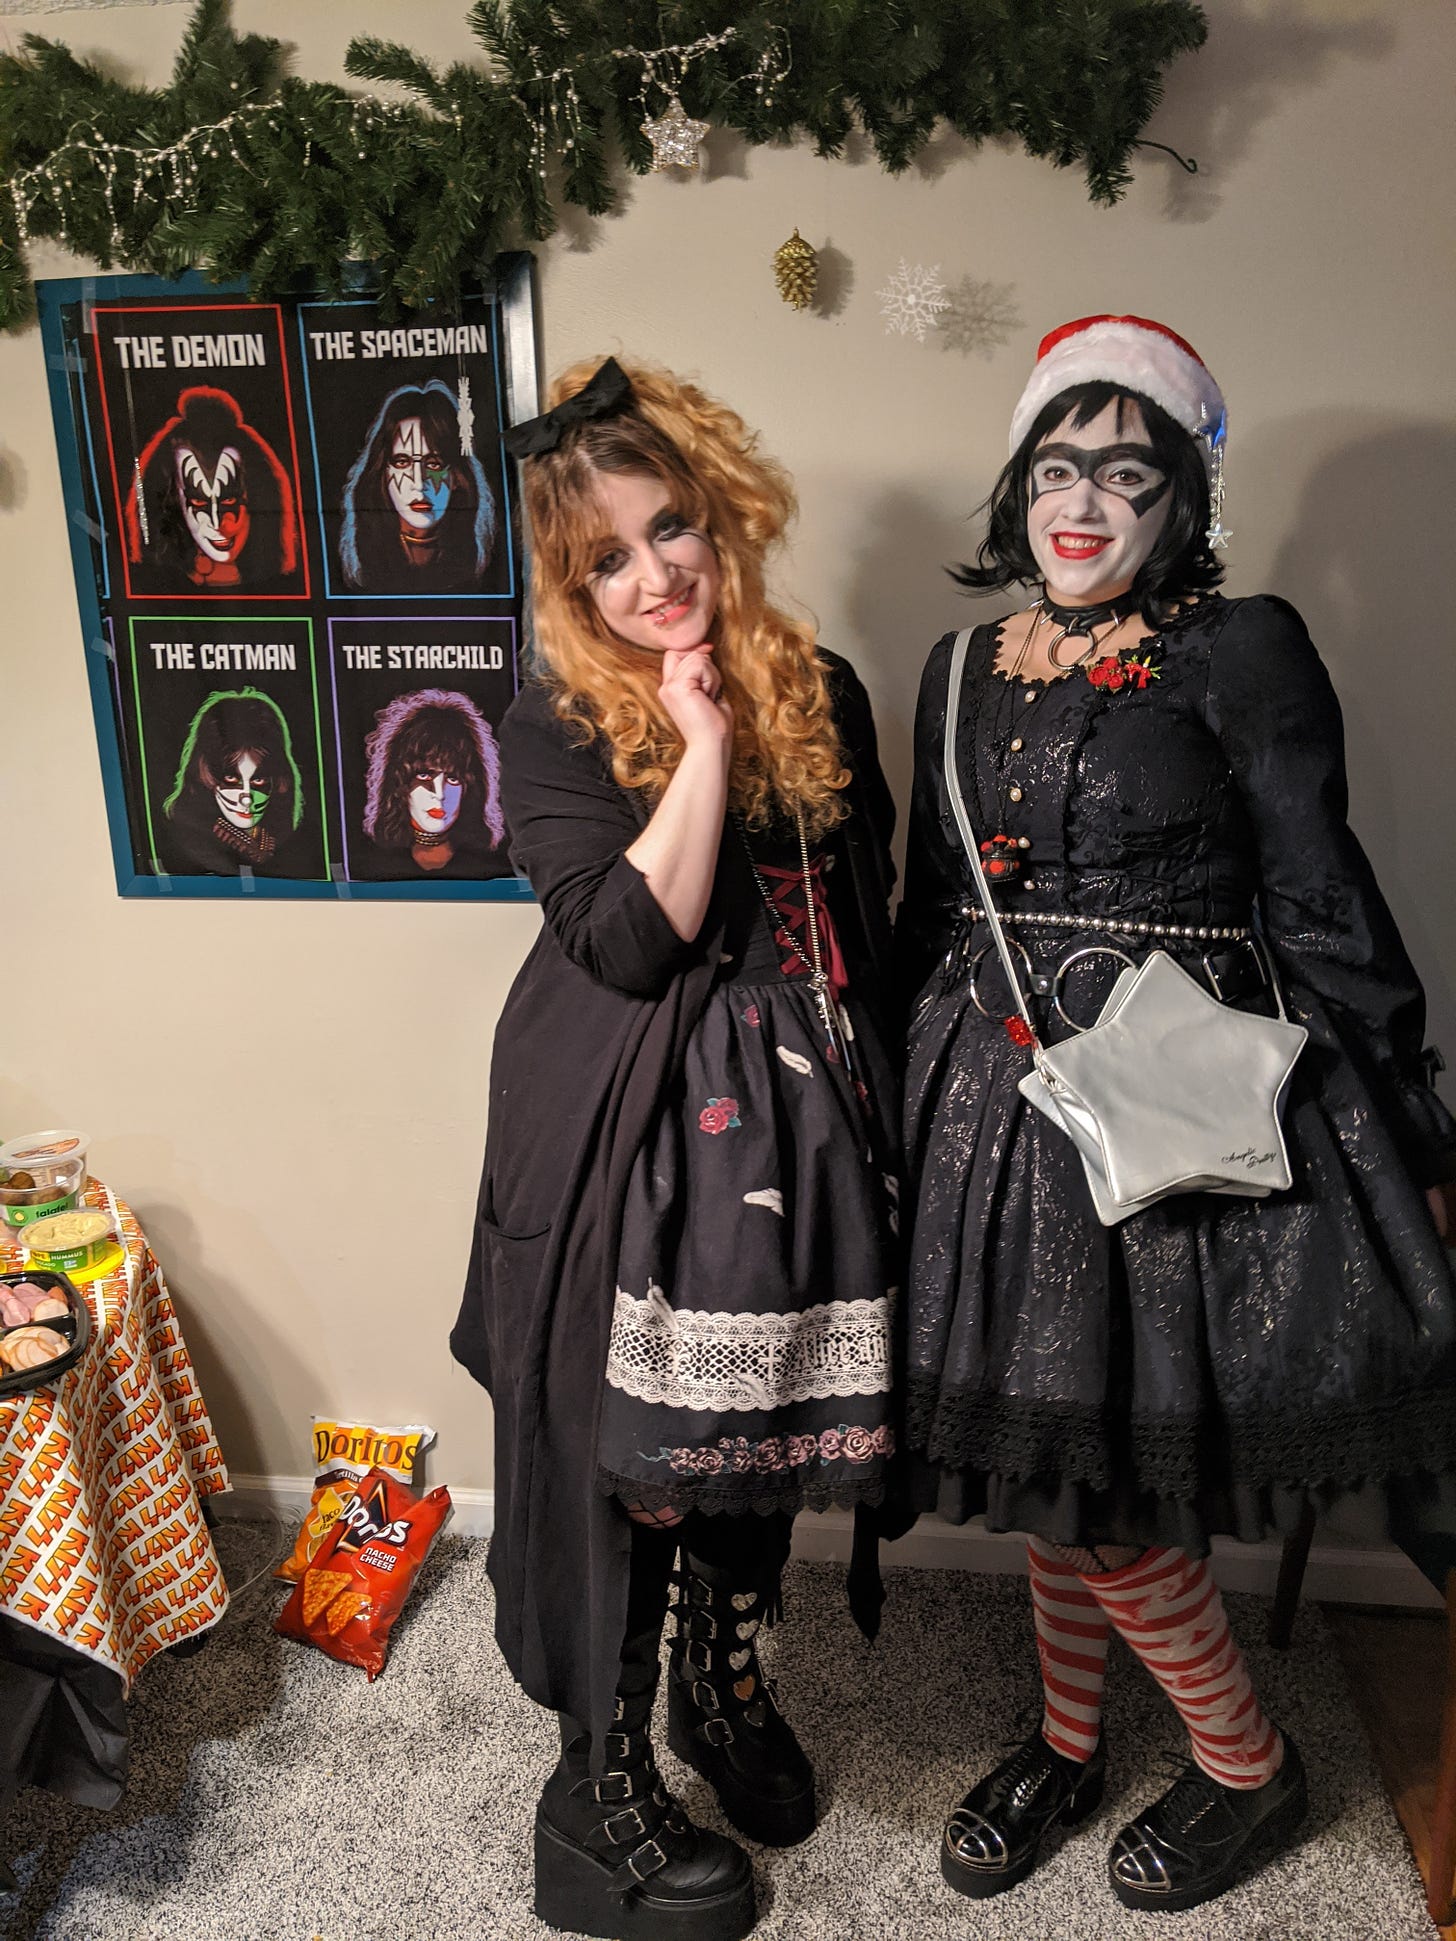 Nif and Lexi (two white women) pose together in Lolita fashion. Nif has mostly blonde hair up in a flirty half-ponytail with a black bow. She is wearing whiskered eye makeup and pale red lipstick. She is wearing a gothic Lolita/rokku gyaru-inspired look with a long cardigan, an AatP dress, and Demonia boots. Lexi has black hair and is wearing a santa hat with a silver star clip. She is wearing "The Bandit" KISS makeup. She has a spike collar and big chain belt, red accessories, a silver purse, and she is wearing a damask-print dress by Lief. They are standing next to a KISS poster and some Christmas decorations.